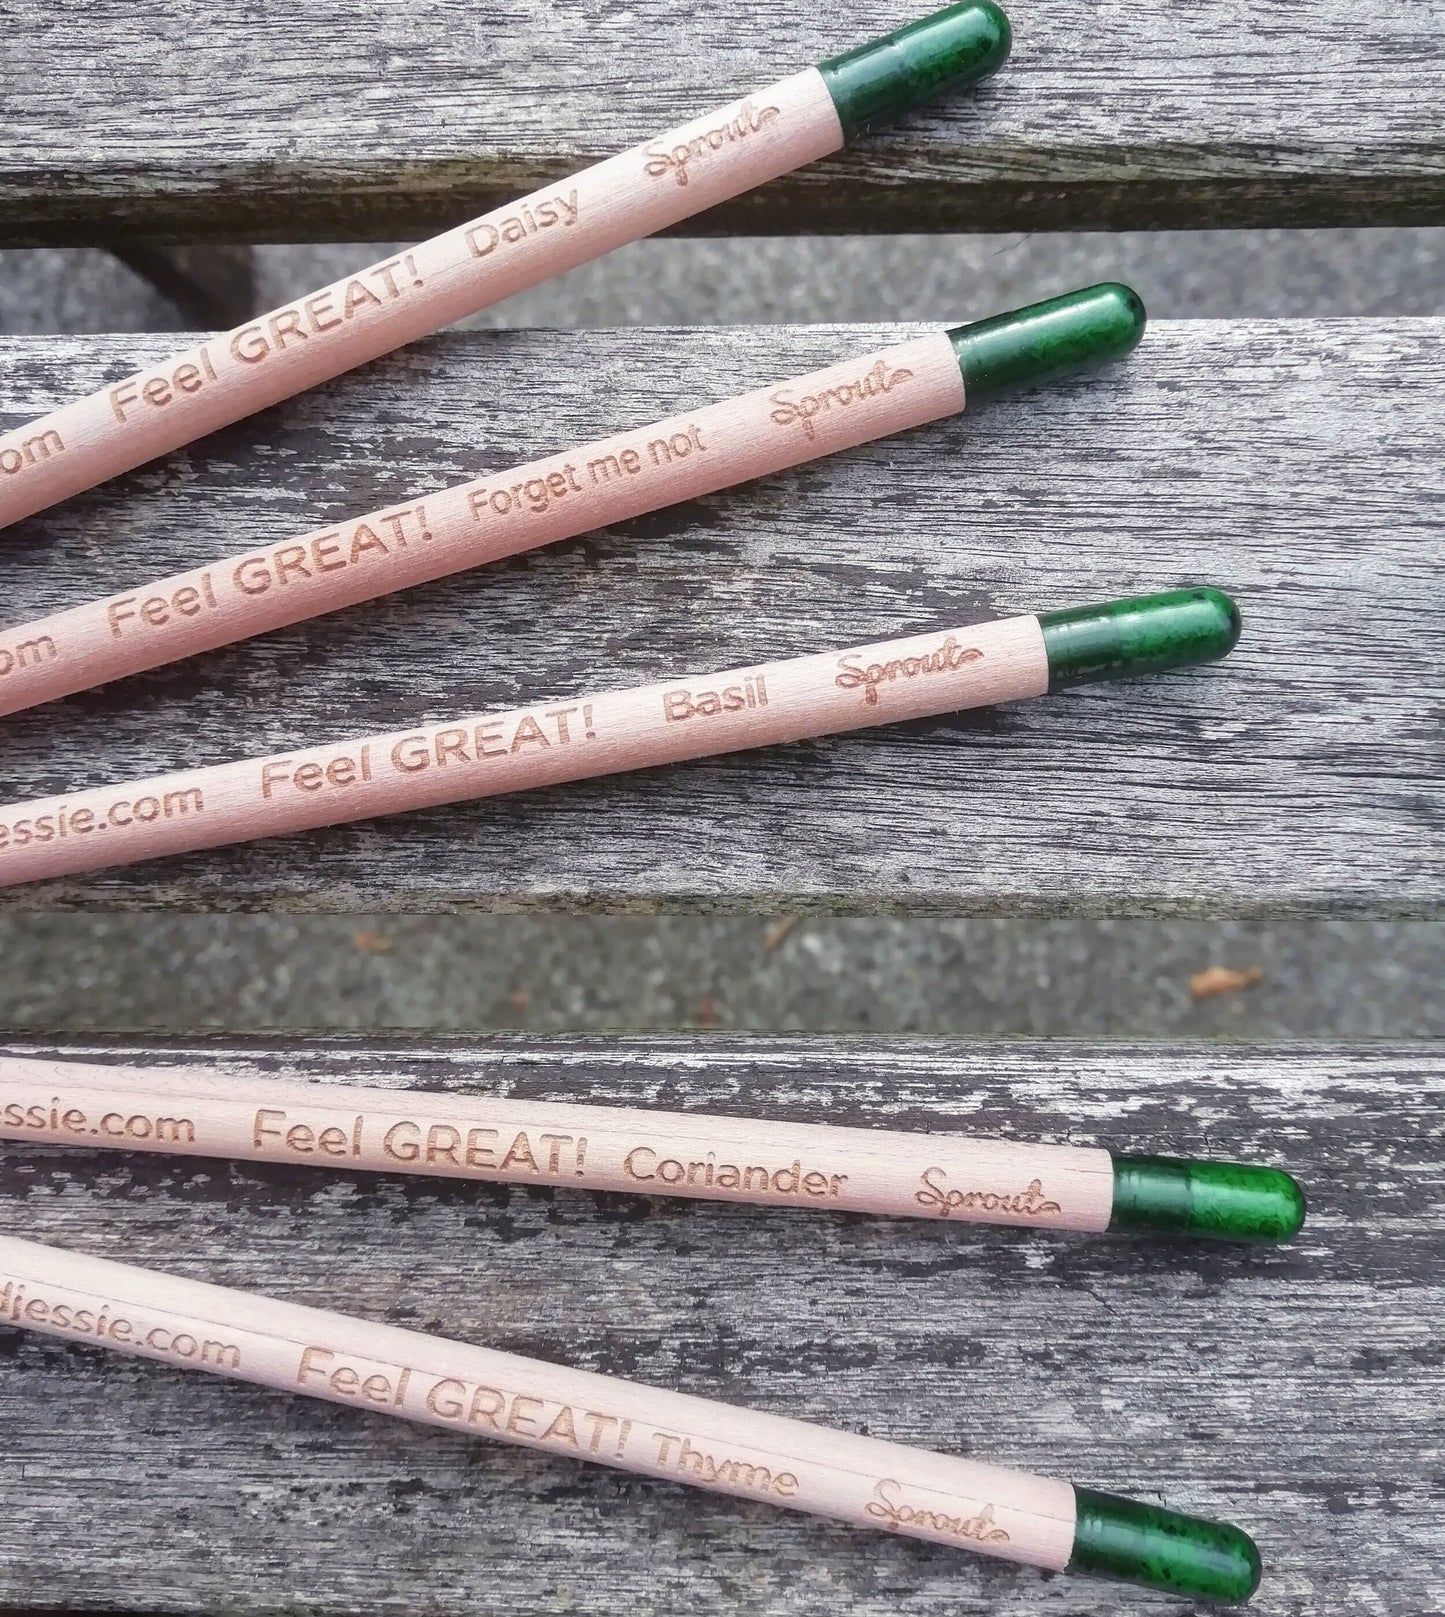 Pack of 5! Graphite Sprout Plantable Pencils - Choose Herbs or Flowers!